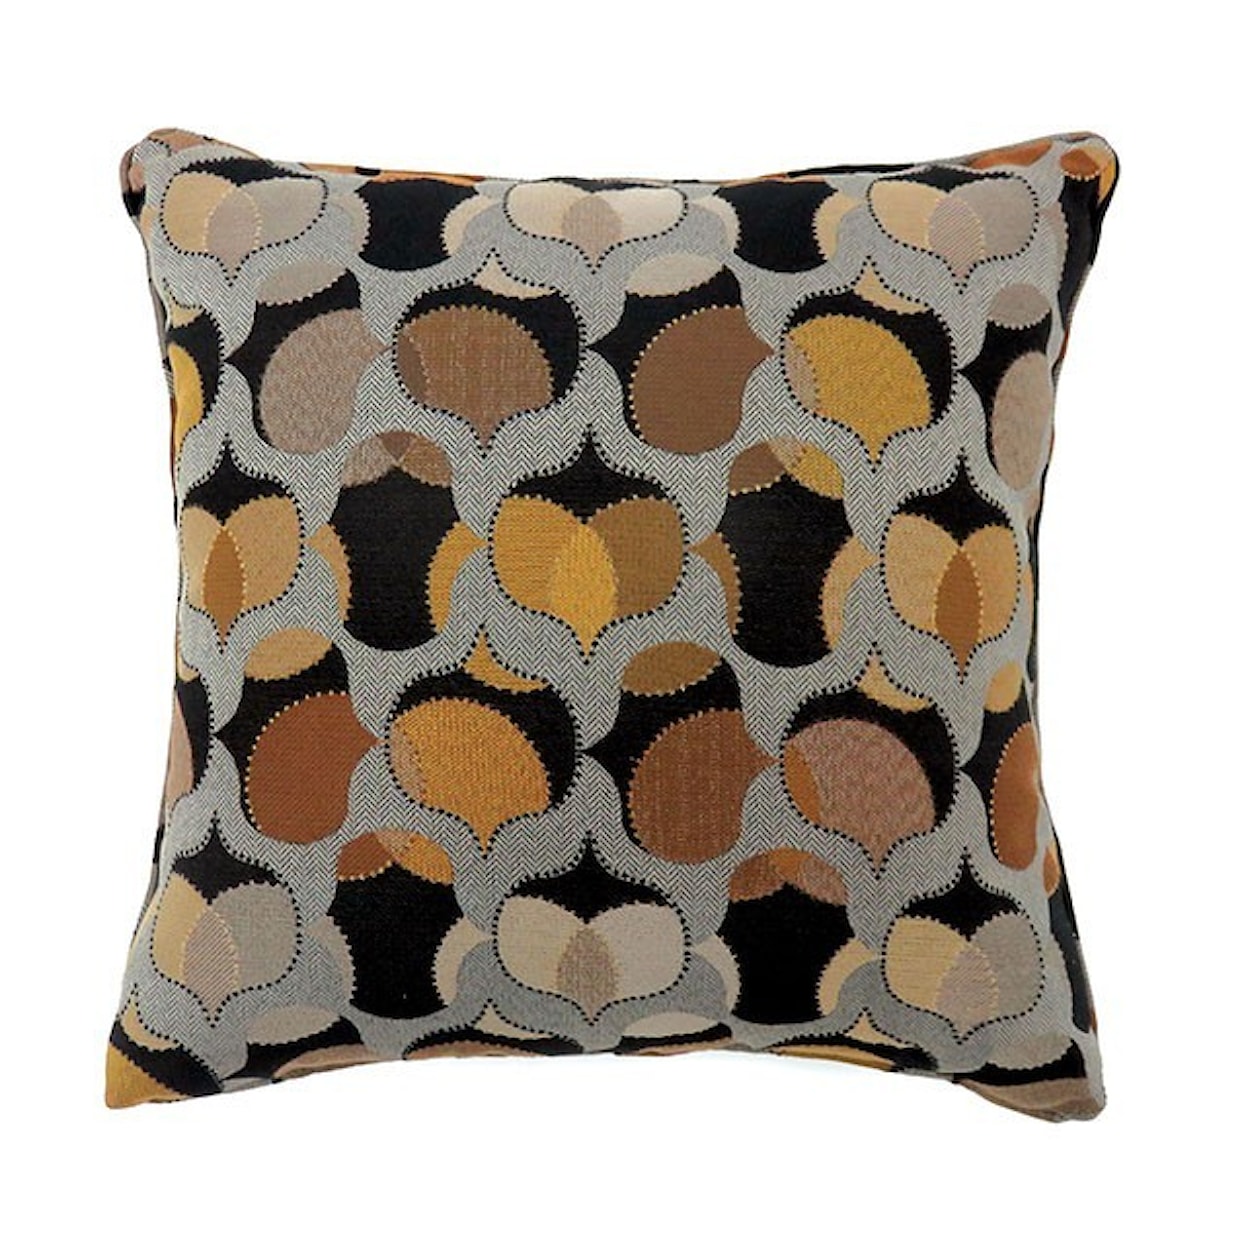 Furniture of America Onio Set of Two 22" X 22" Pillows, Multi